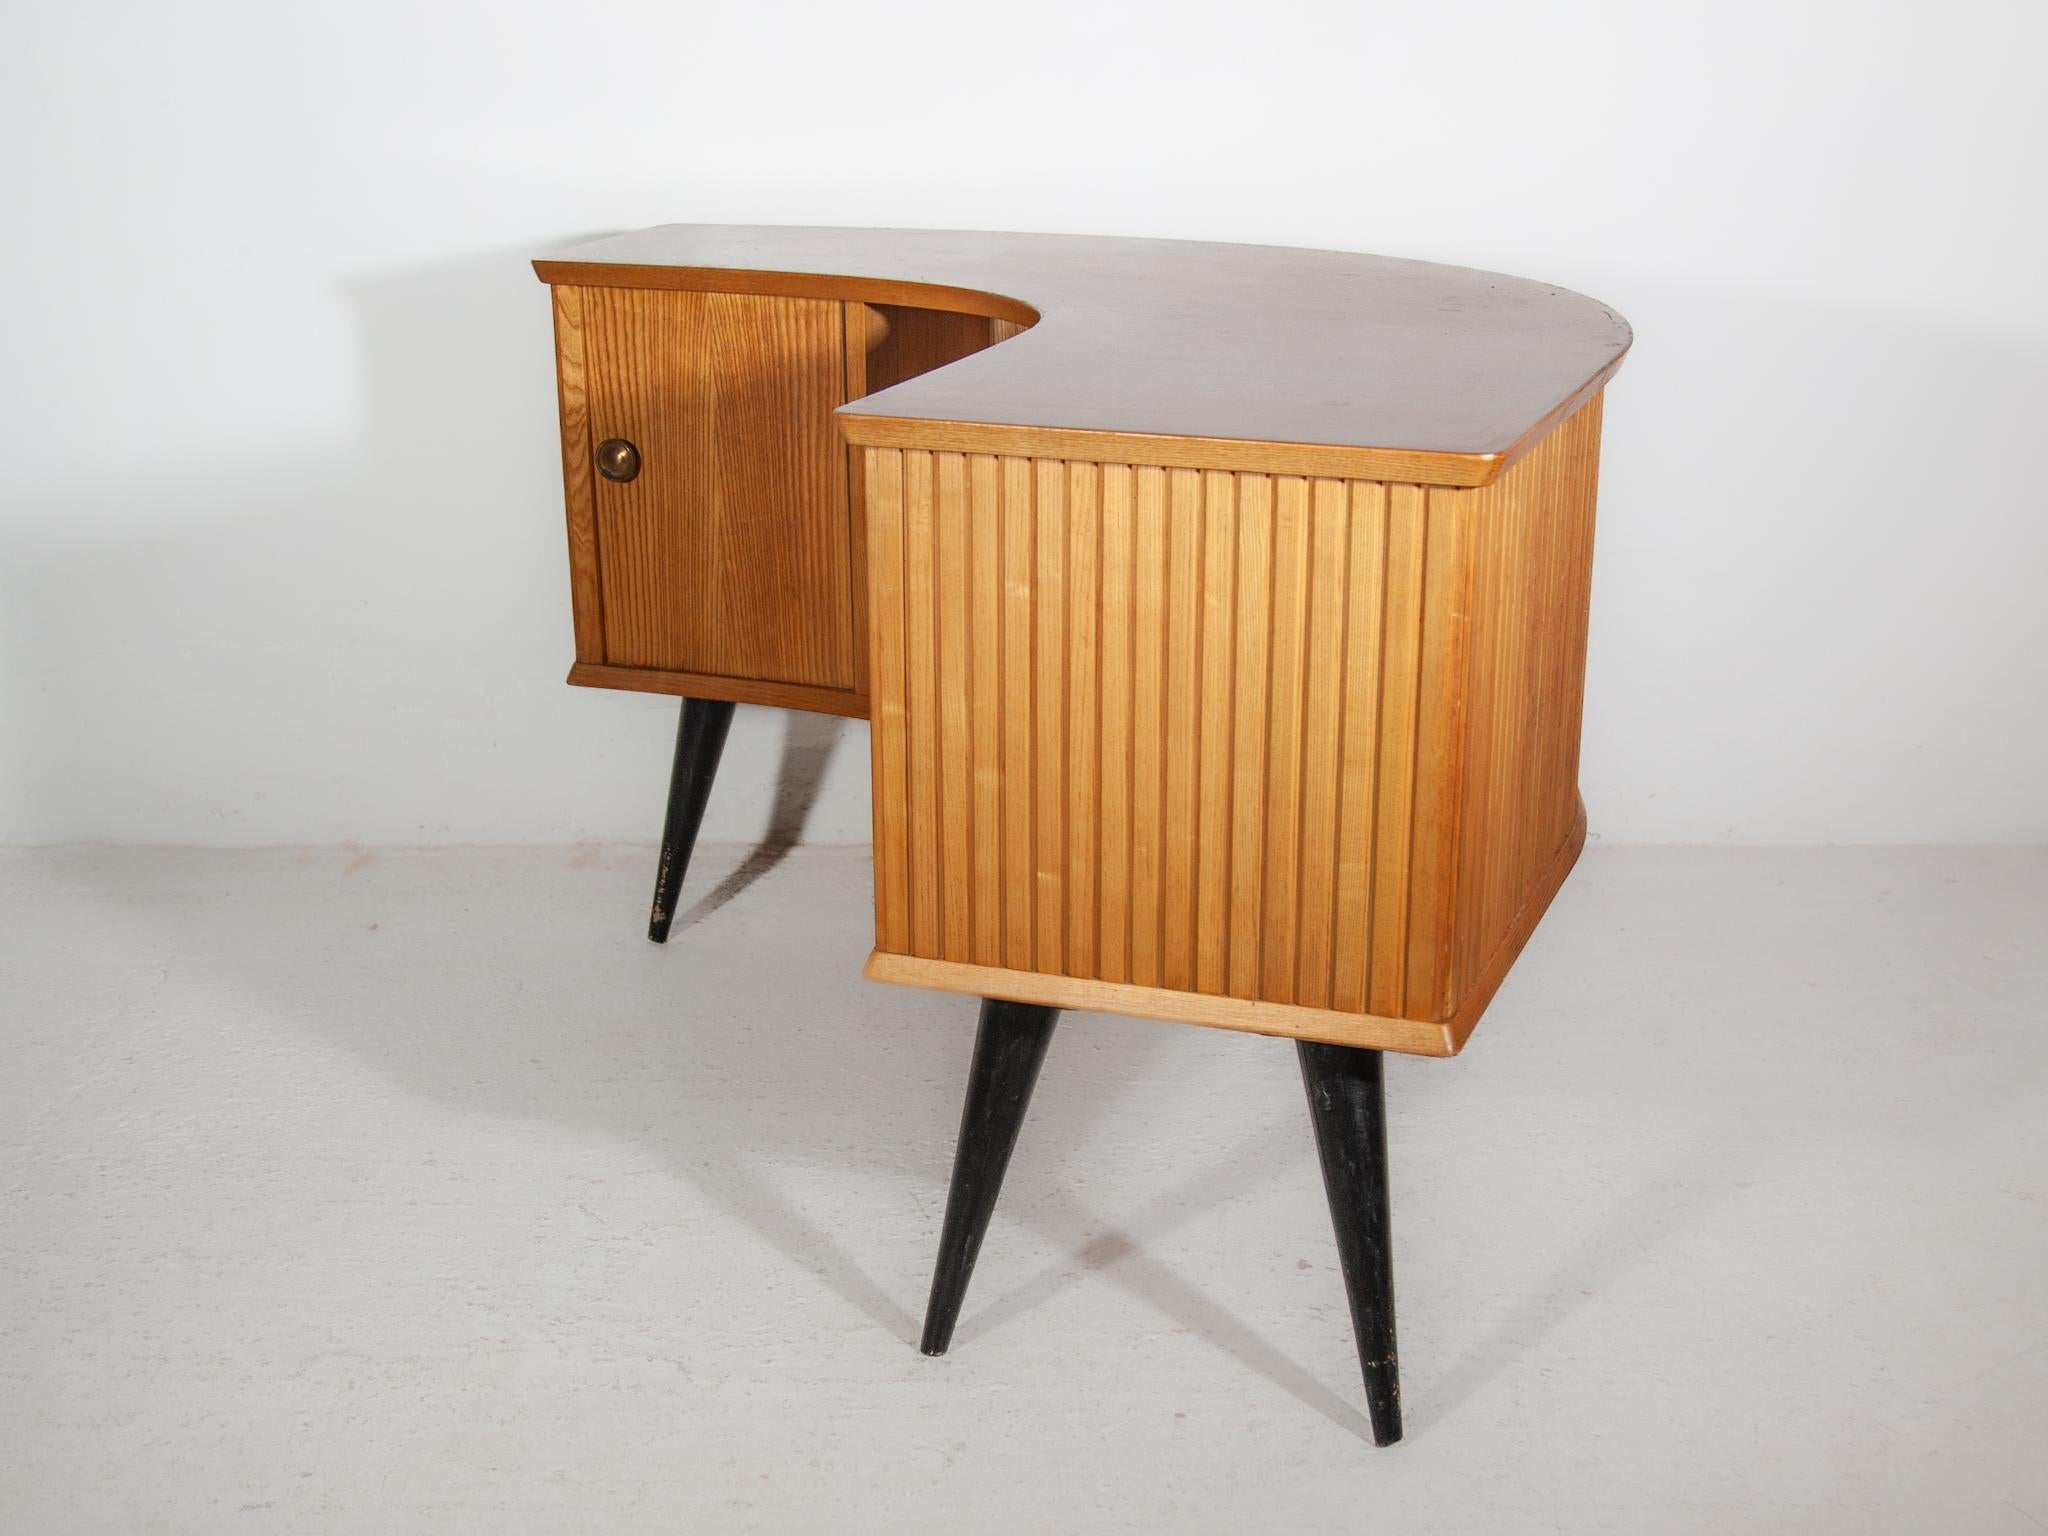 Oak Boomerang Shaped Desk, Shop Counter, 1950s by Alfred Hendrickx For Sale